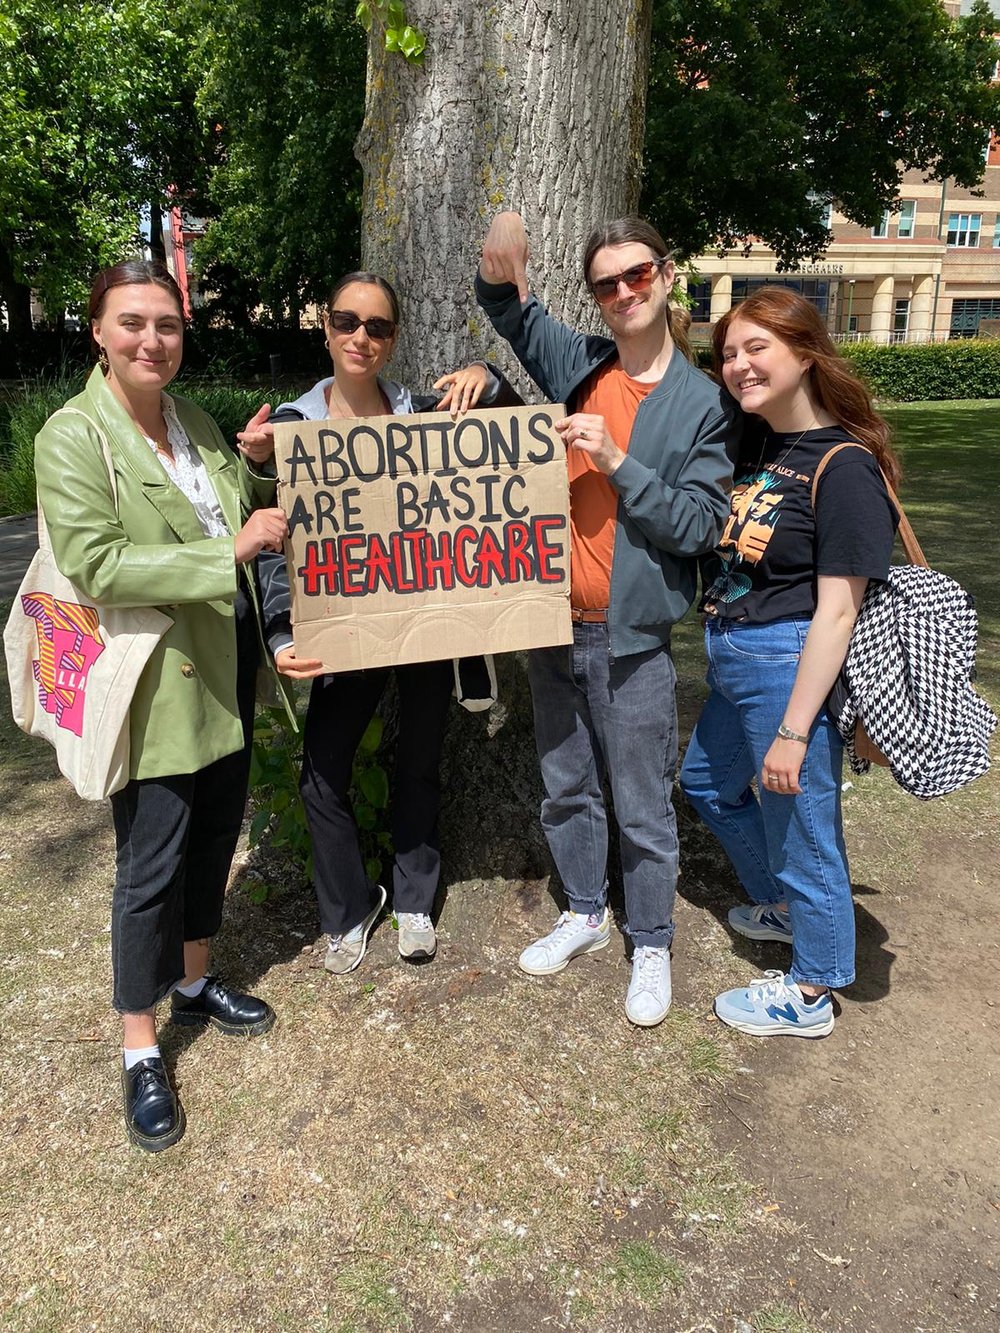 Sam and his book club friends at a protest, 2022. Photo: Jay Mullinger